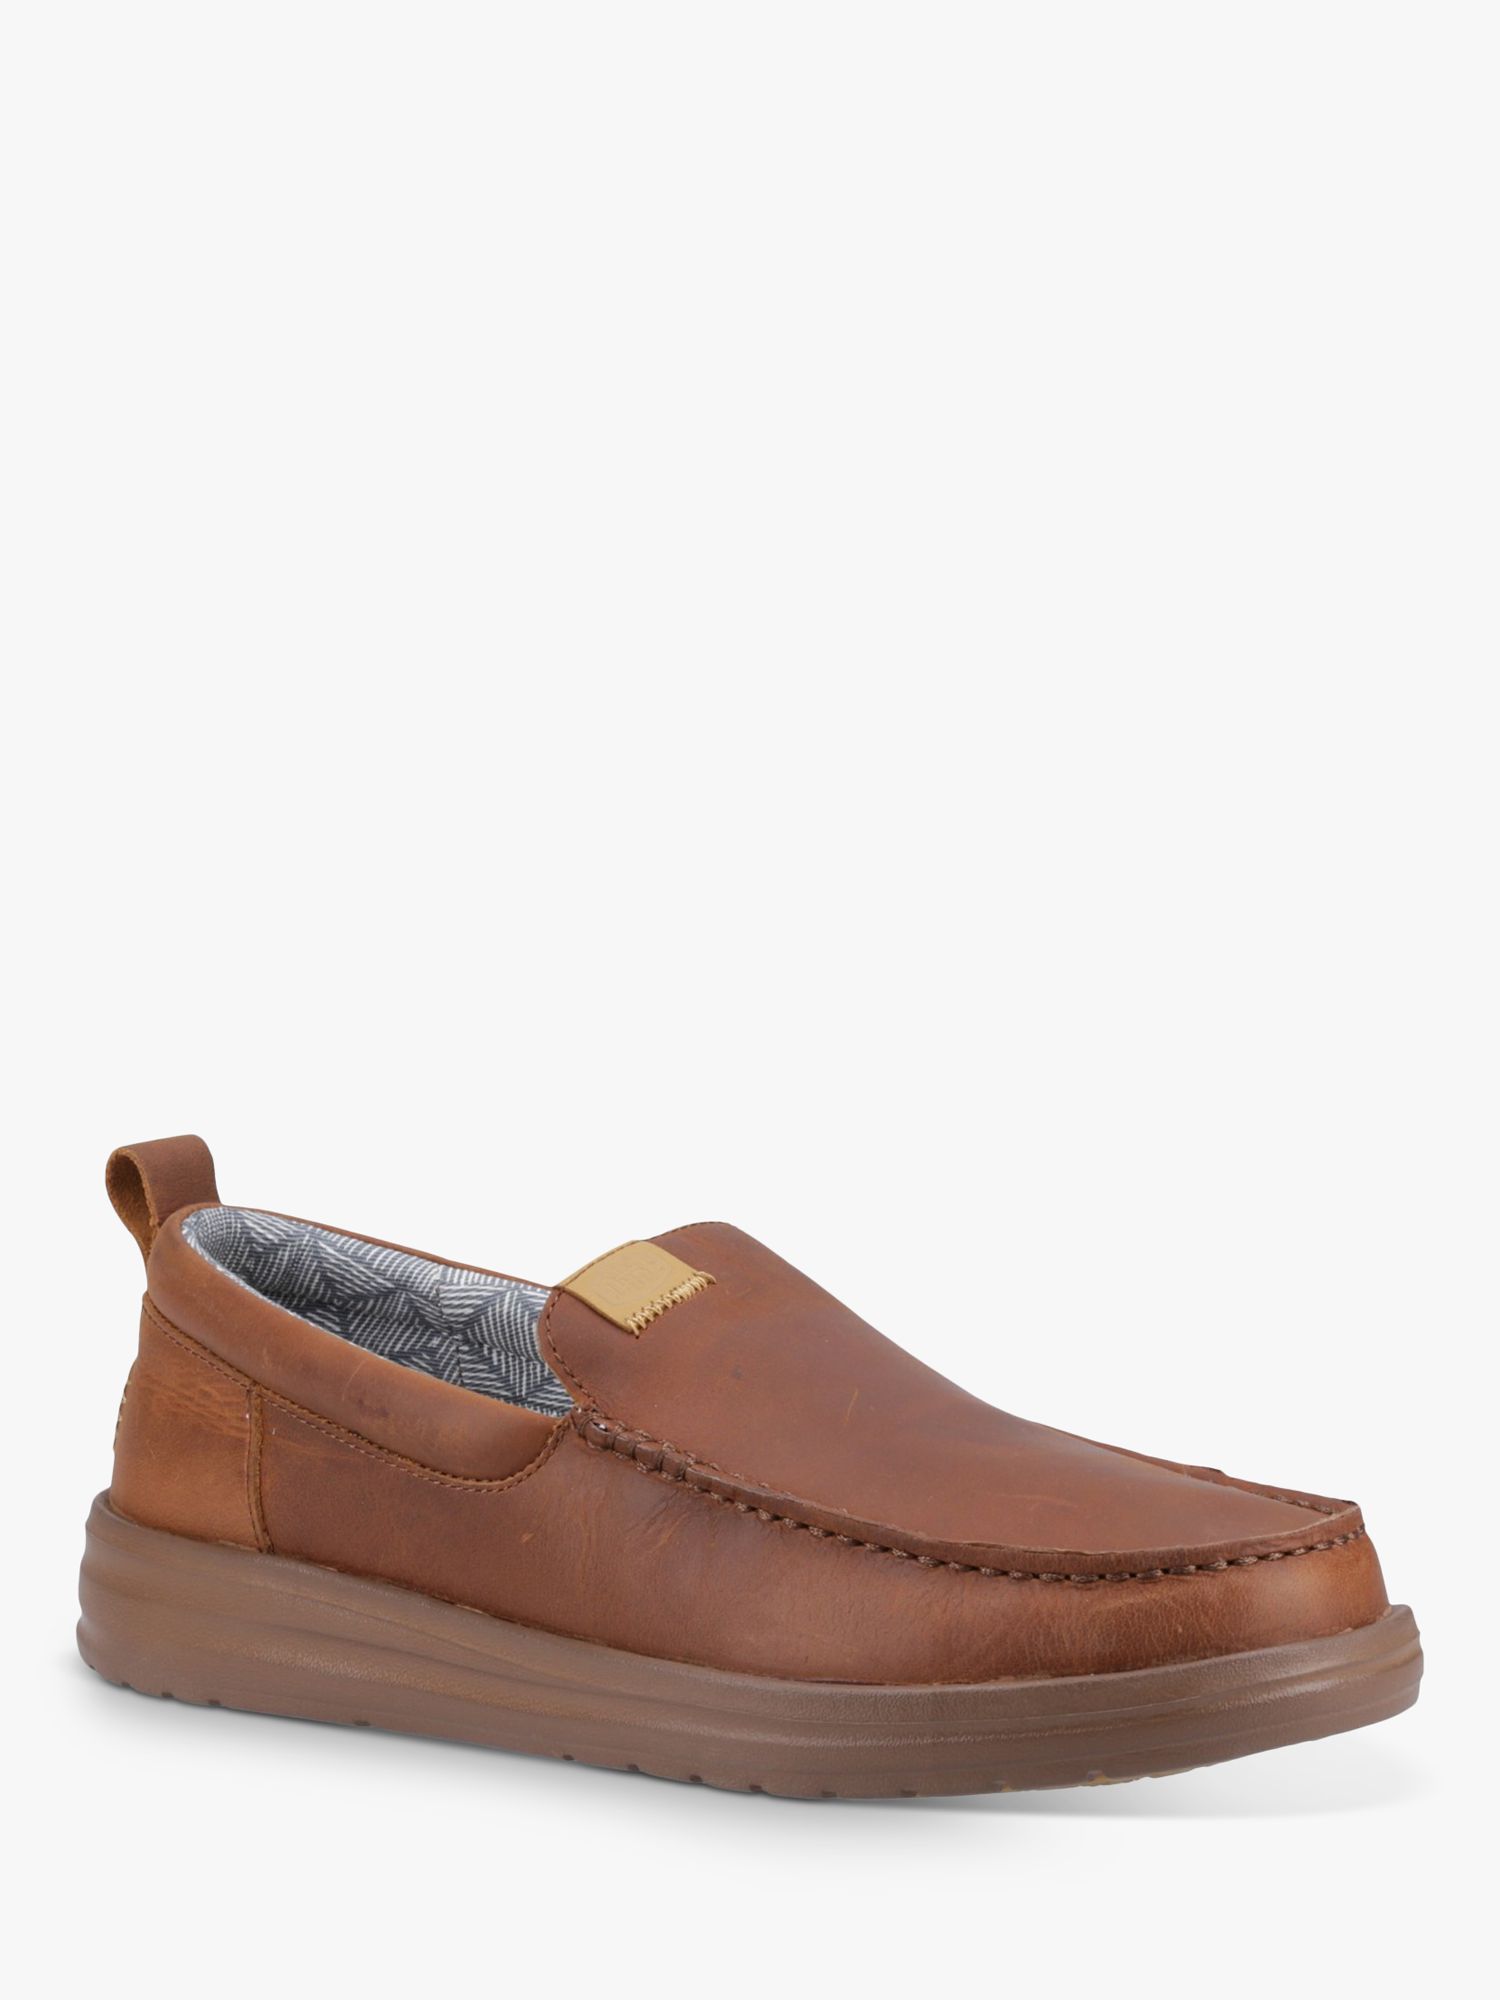 Hey Dude Wally Grip Moccasin Shoes, Brown at John Lewis & Partners